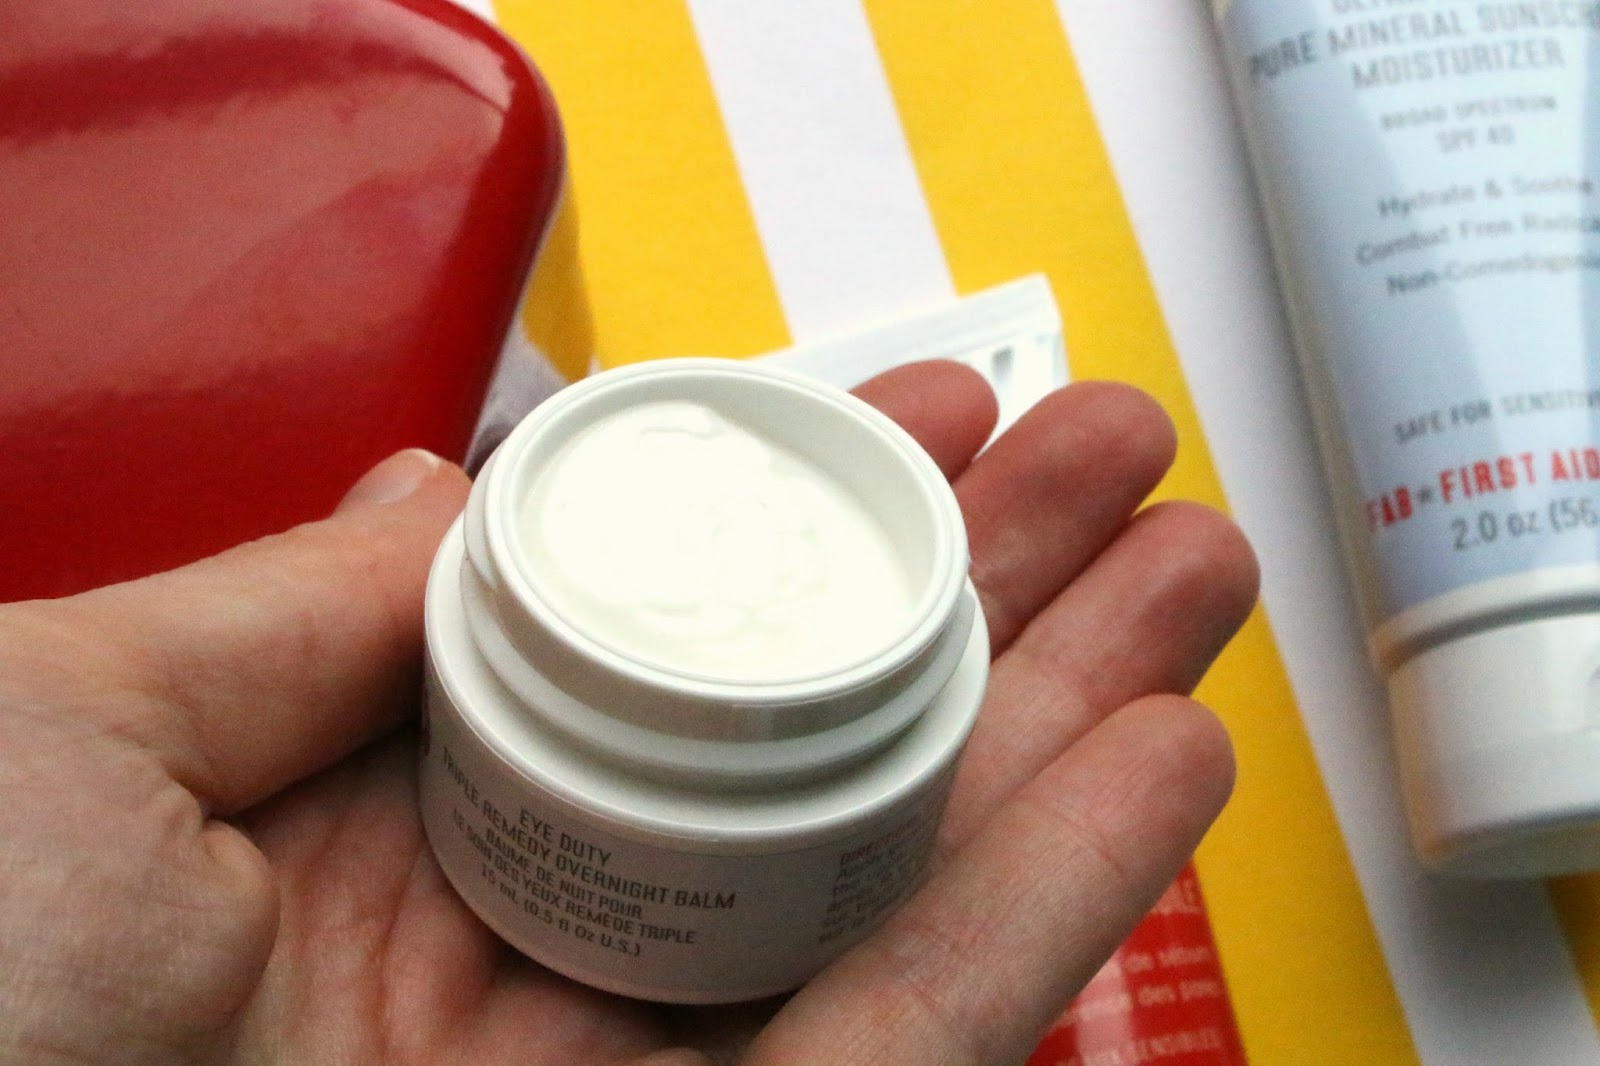 First Aid Beauty product review